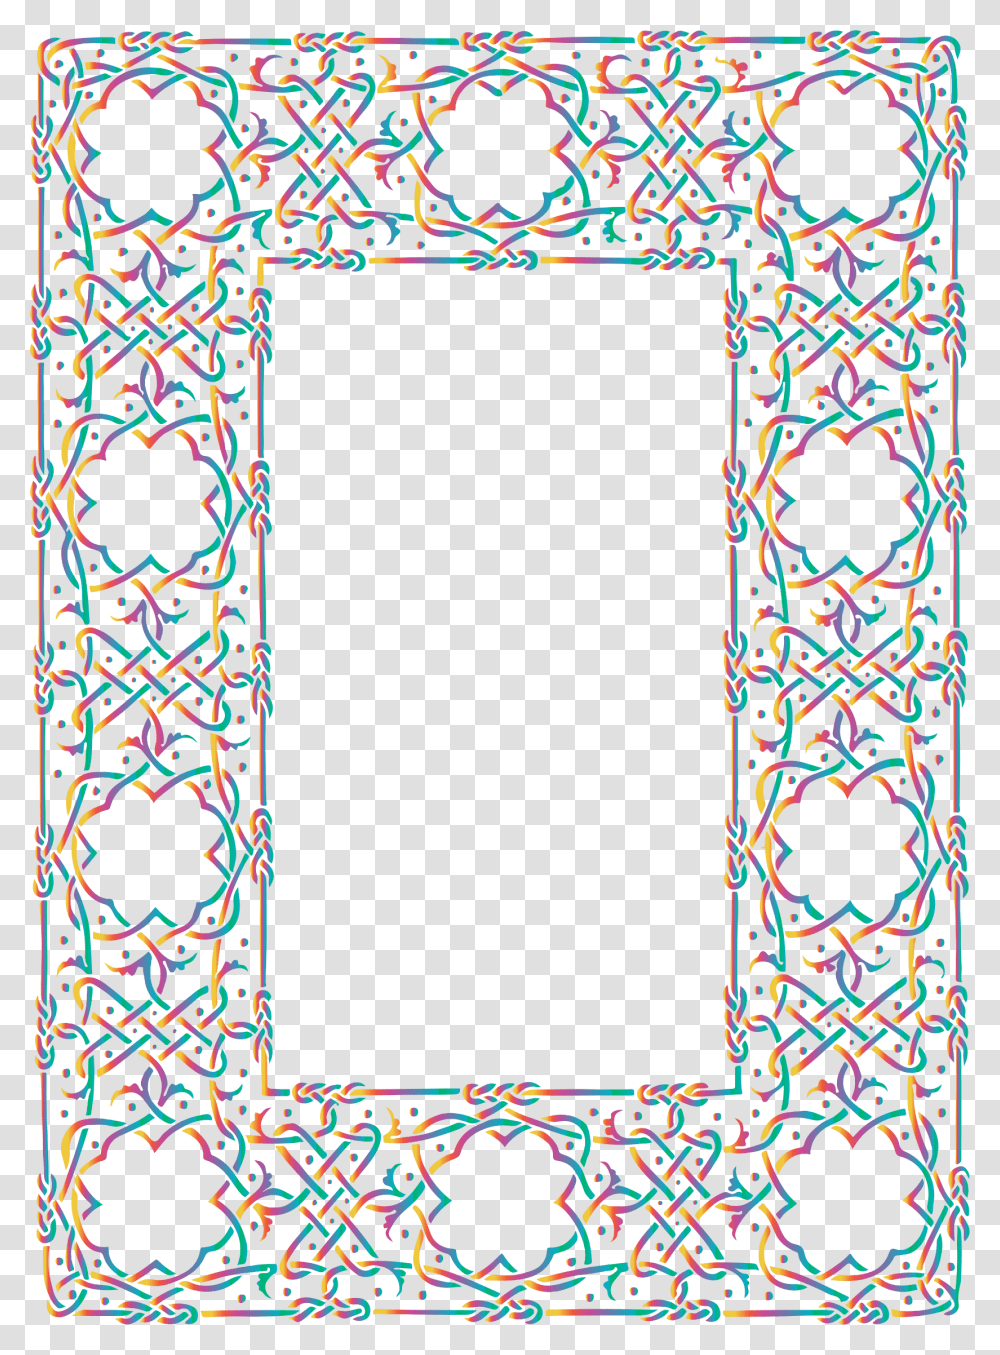 Geometric Decor Border Clipart Download Frames And Borders Geometric, Number, Pattern Transparent Png